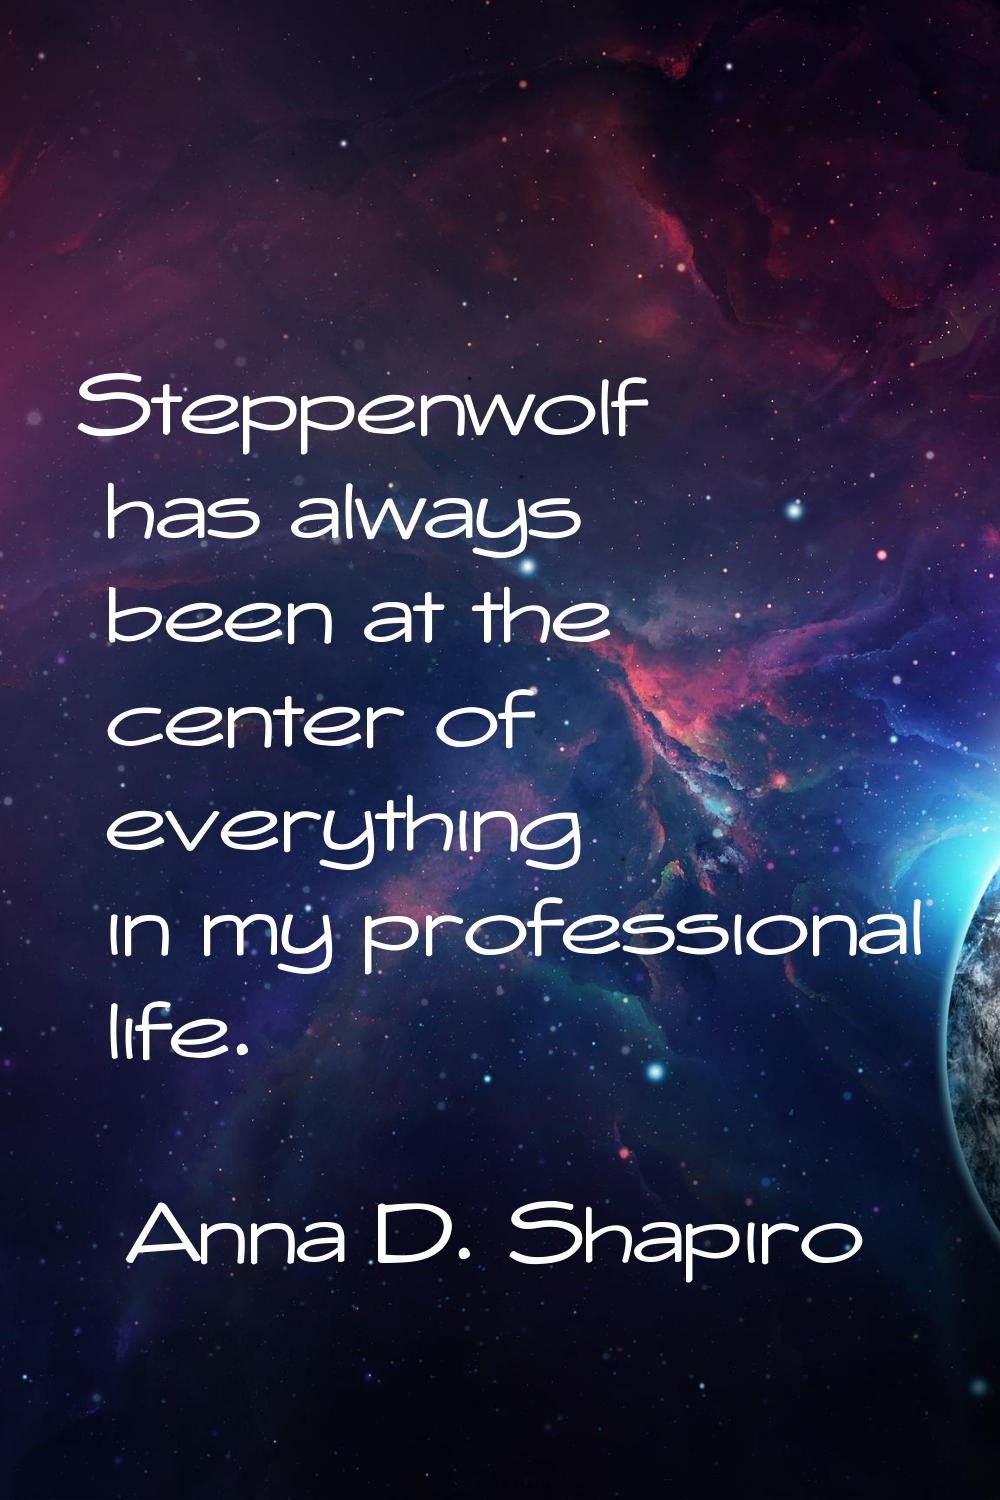 Steppenwolf has always been at the center of everything in my professional life.